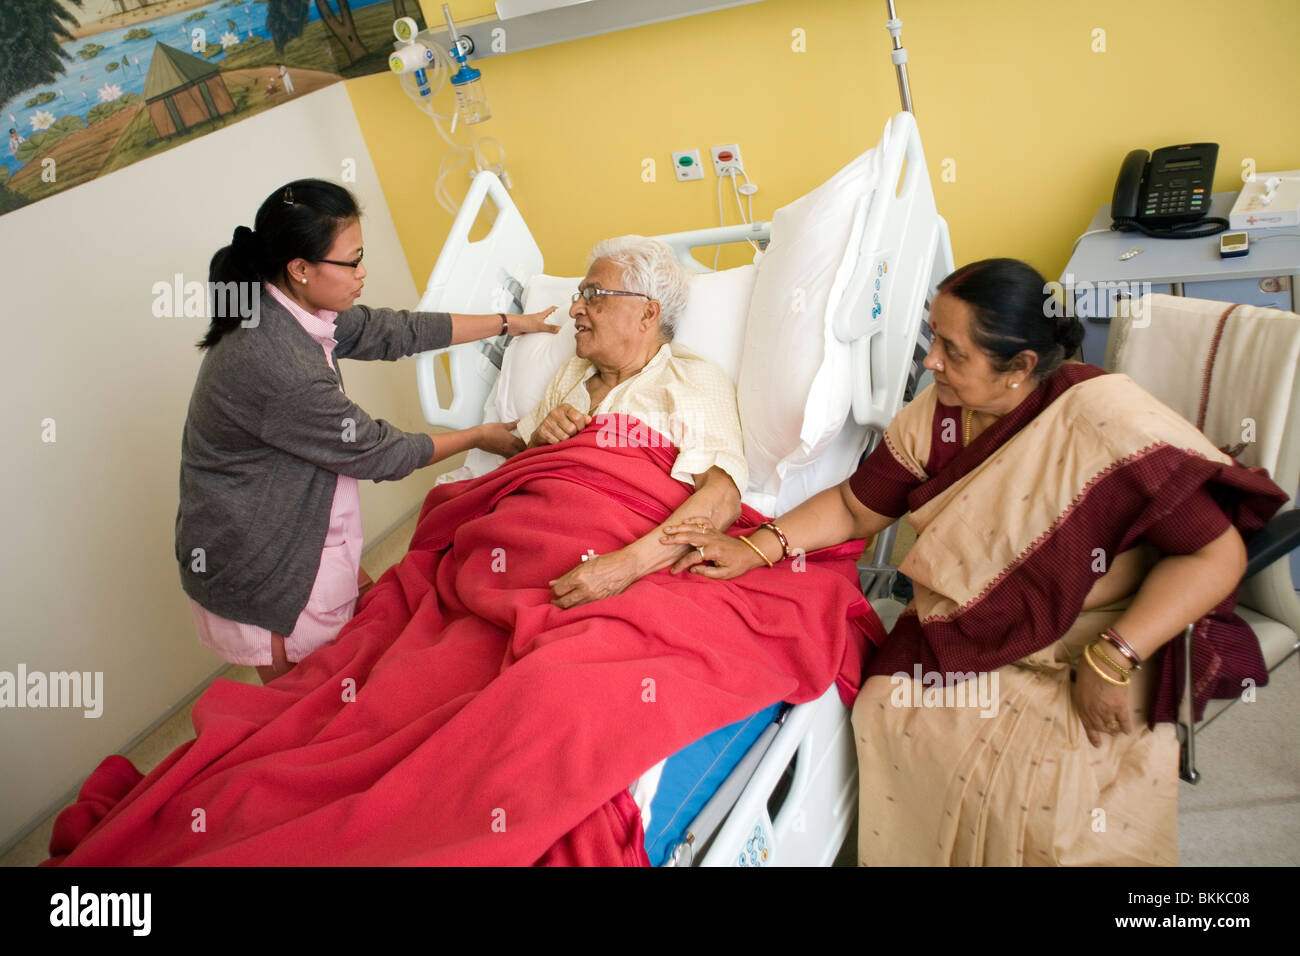 A nurse makes a patient comfortable in bed at the Medicity Hospital, Gurgaon Stock Photo